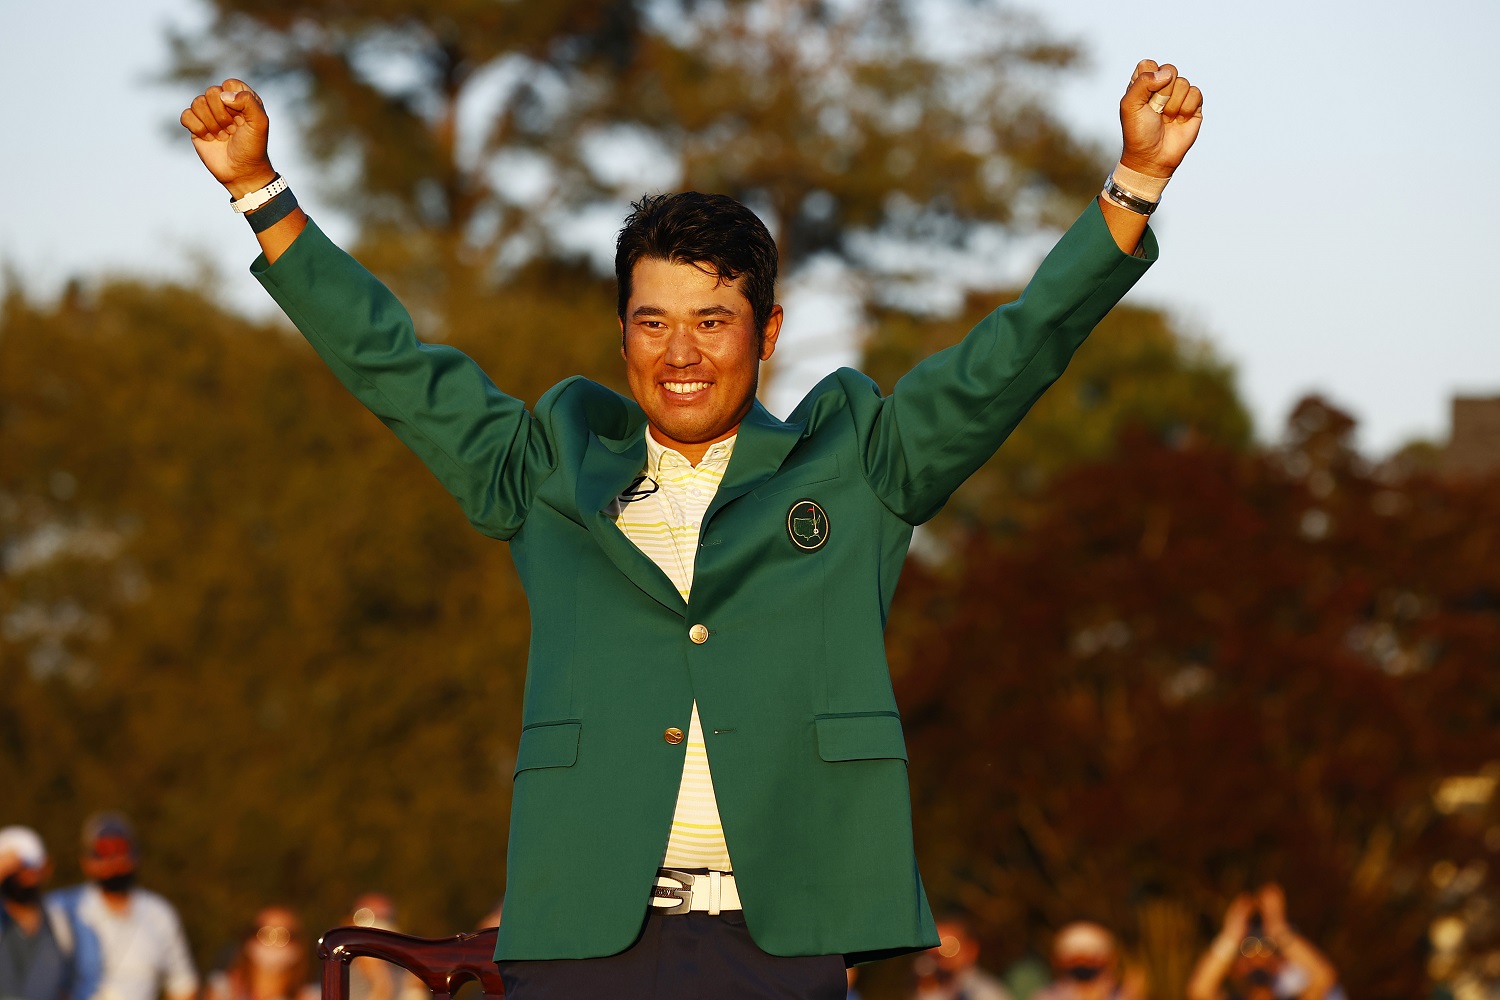 Hideki Matsuyama held on to win the 2021 championship at The Masters by one stroke at Augusta National Golf Club.